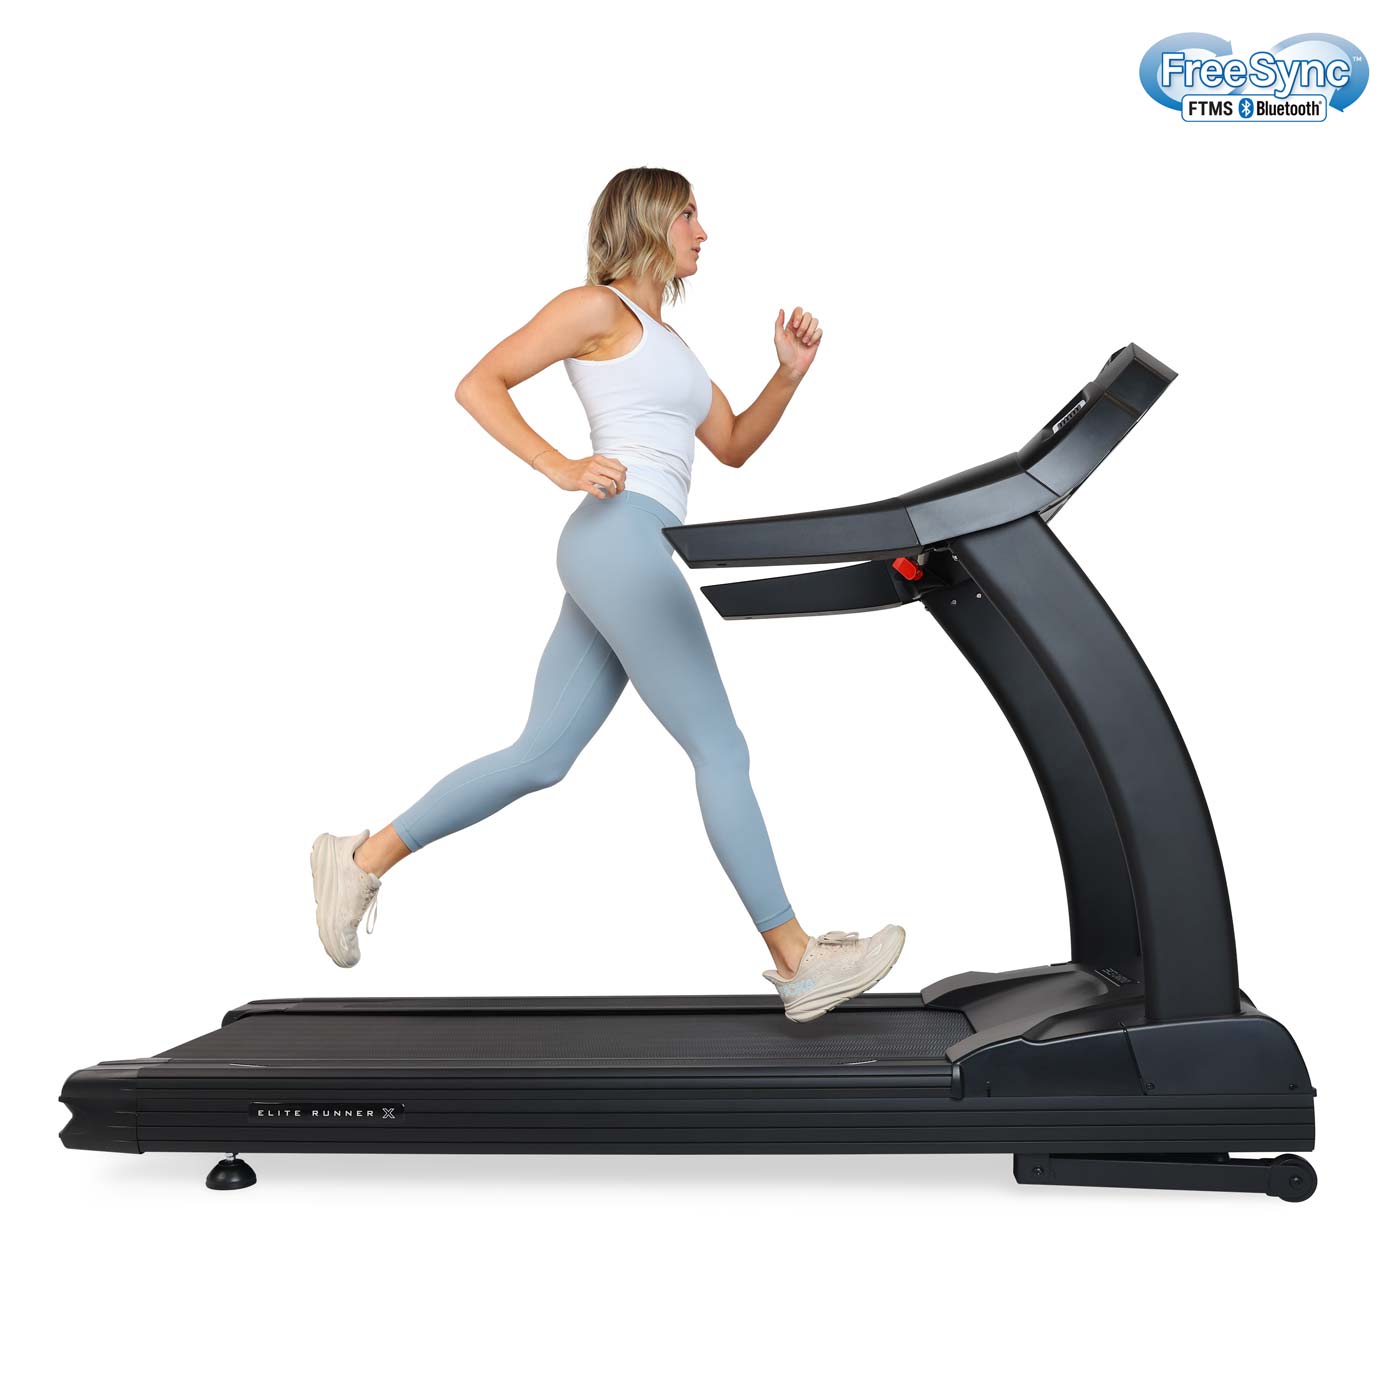 Why The 3G Cardio Elite Runner X Treadmill Is A Recommended Best Buy